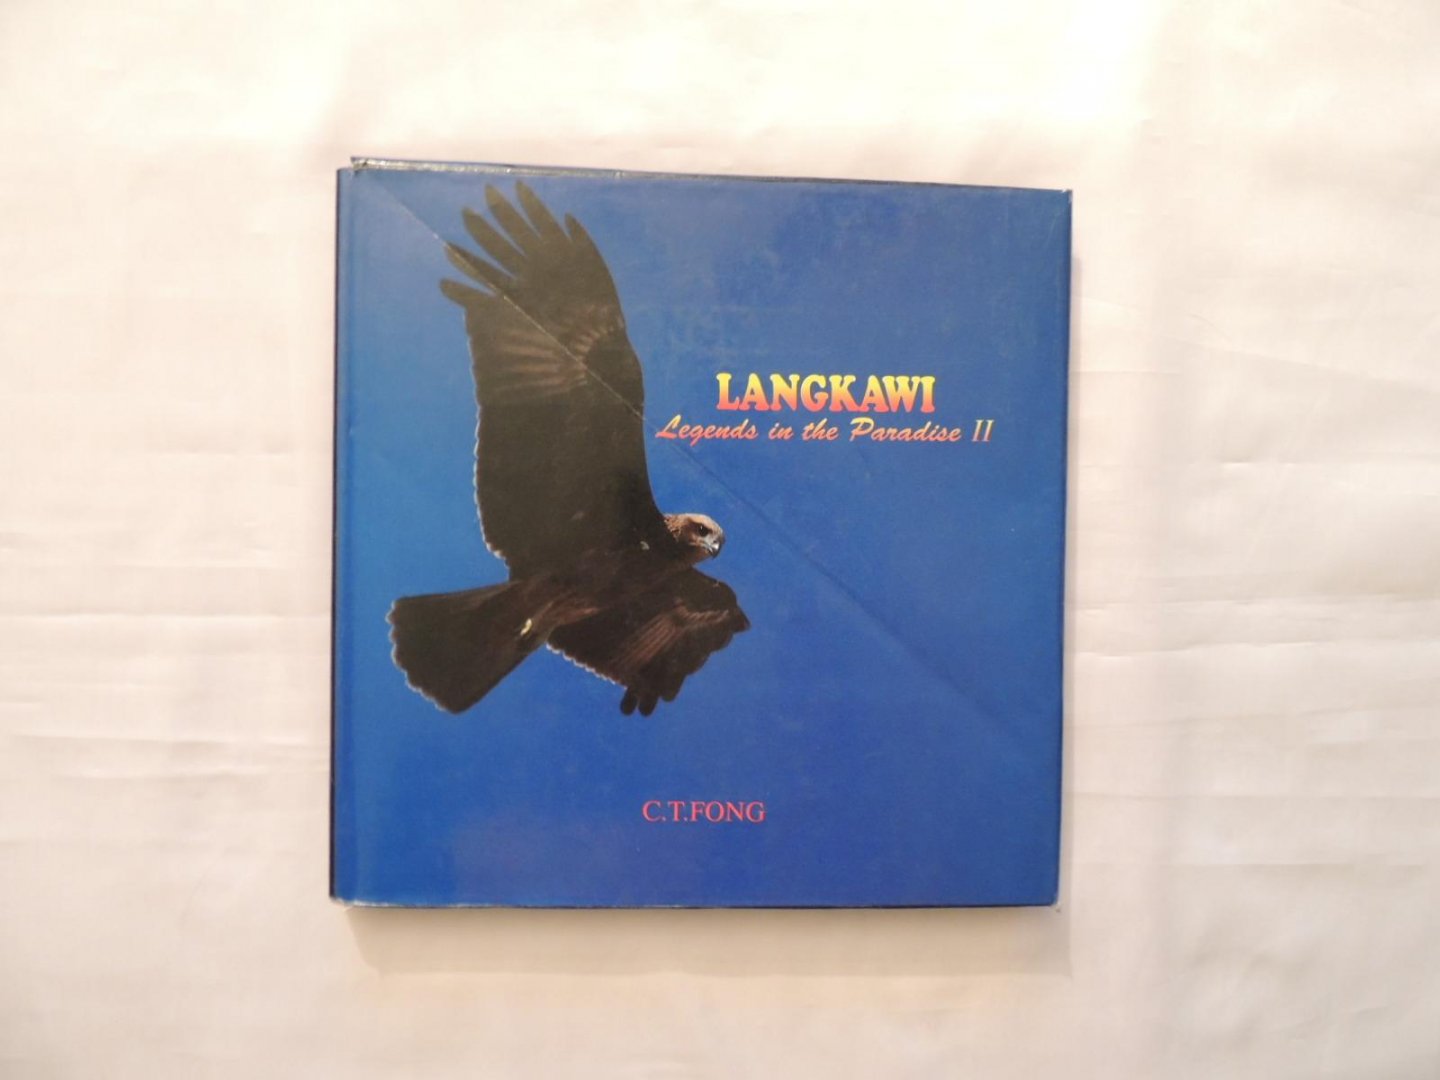 Fong C. T. - Langkawi : legends in the paradise  2.  II